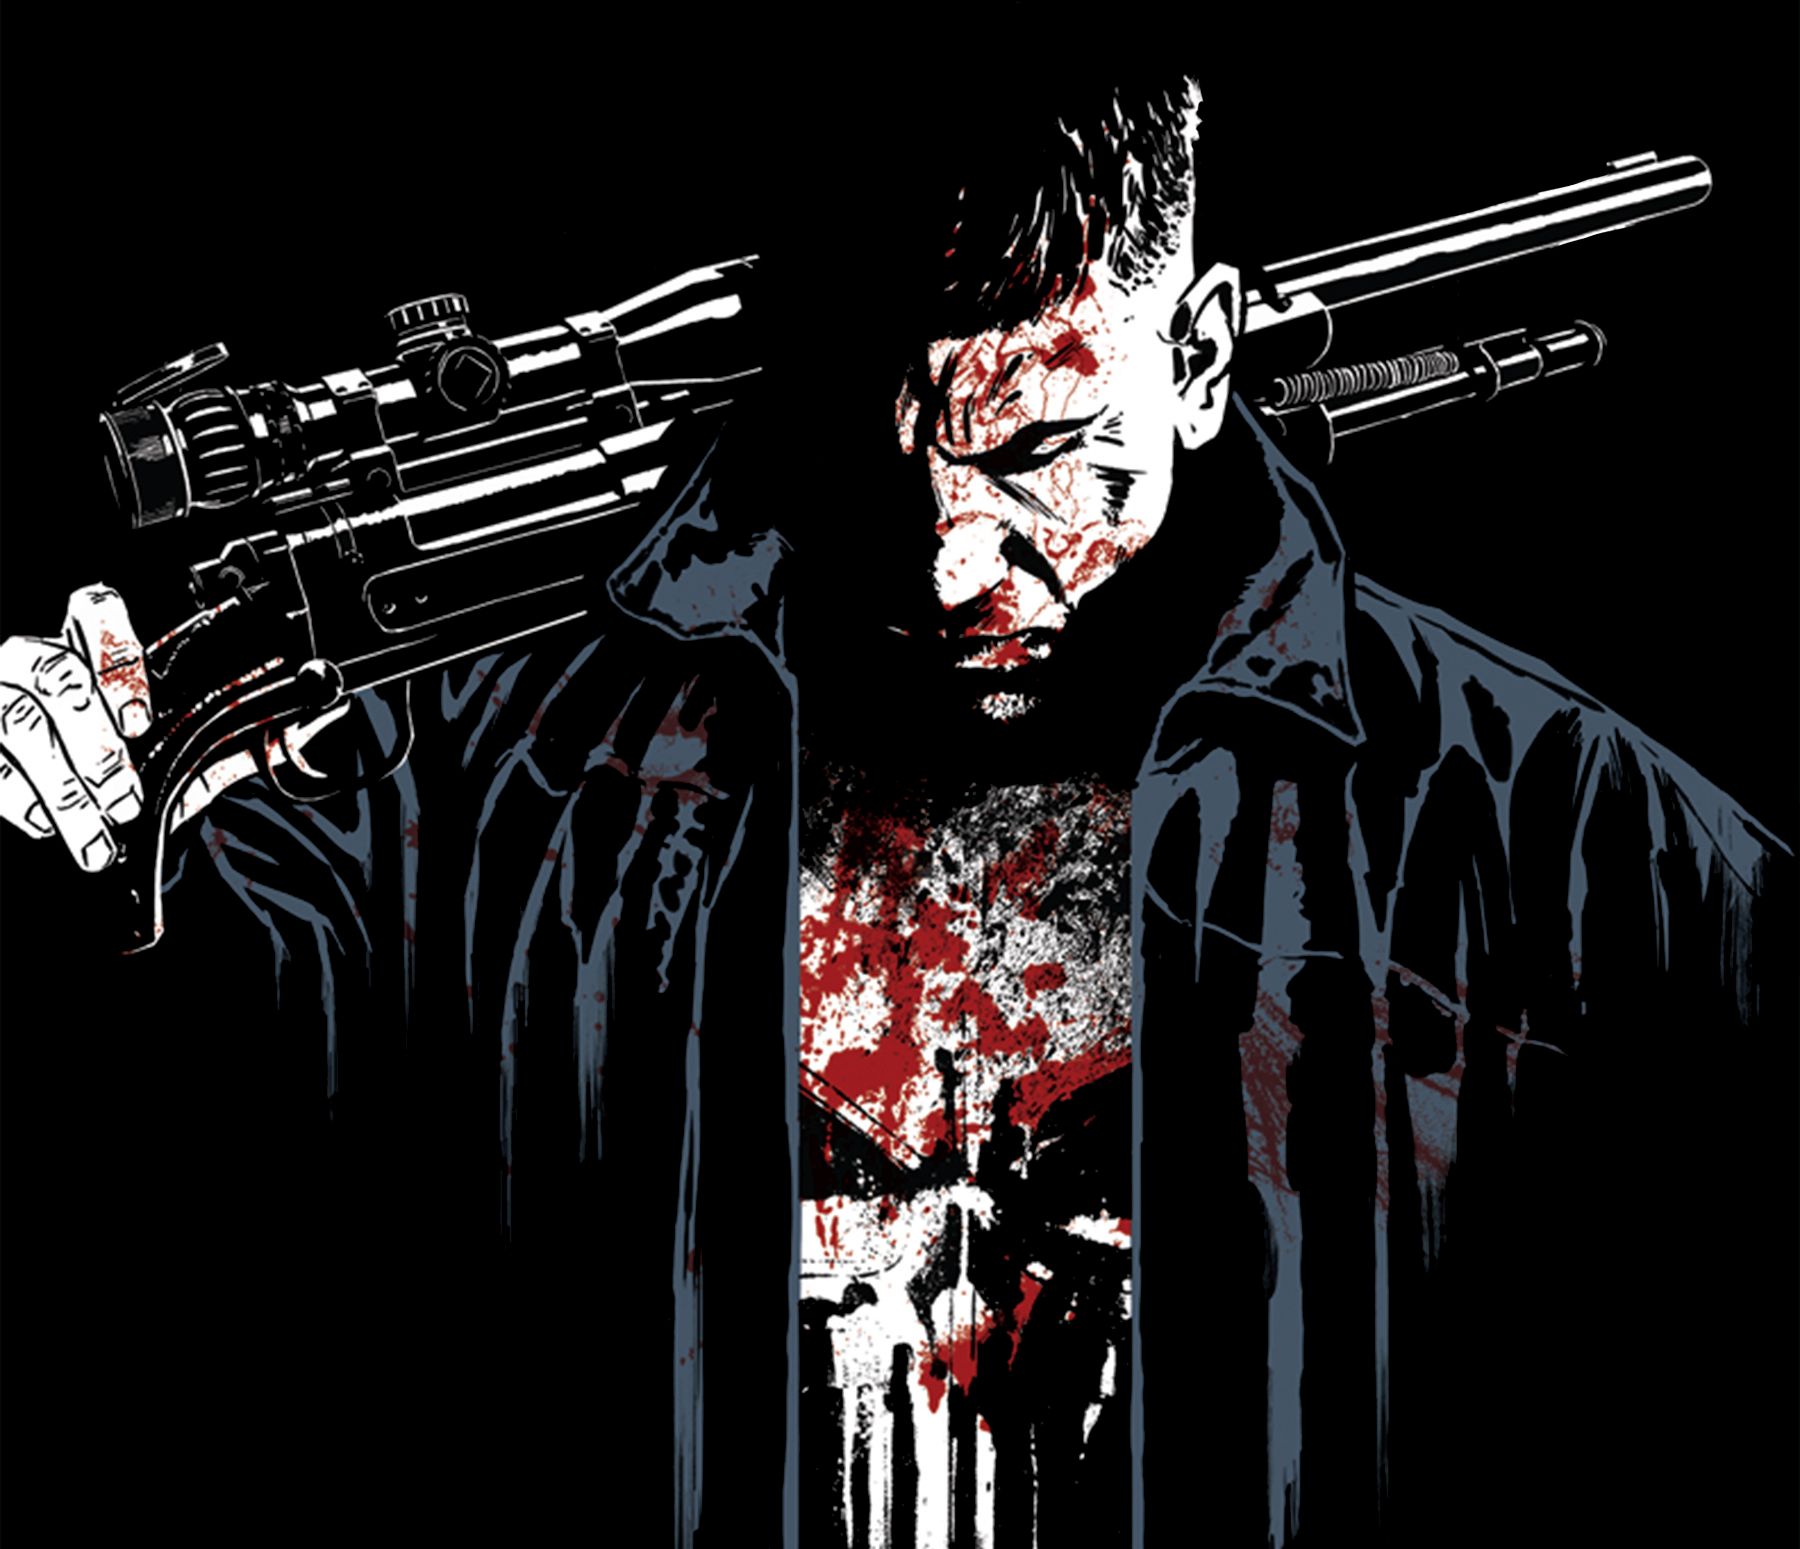 Wallpaper Marvel, The Punisher, The Punisher for mobile and